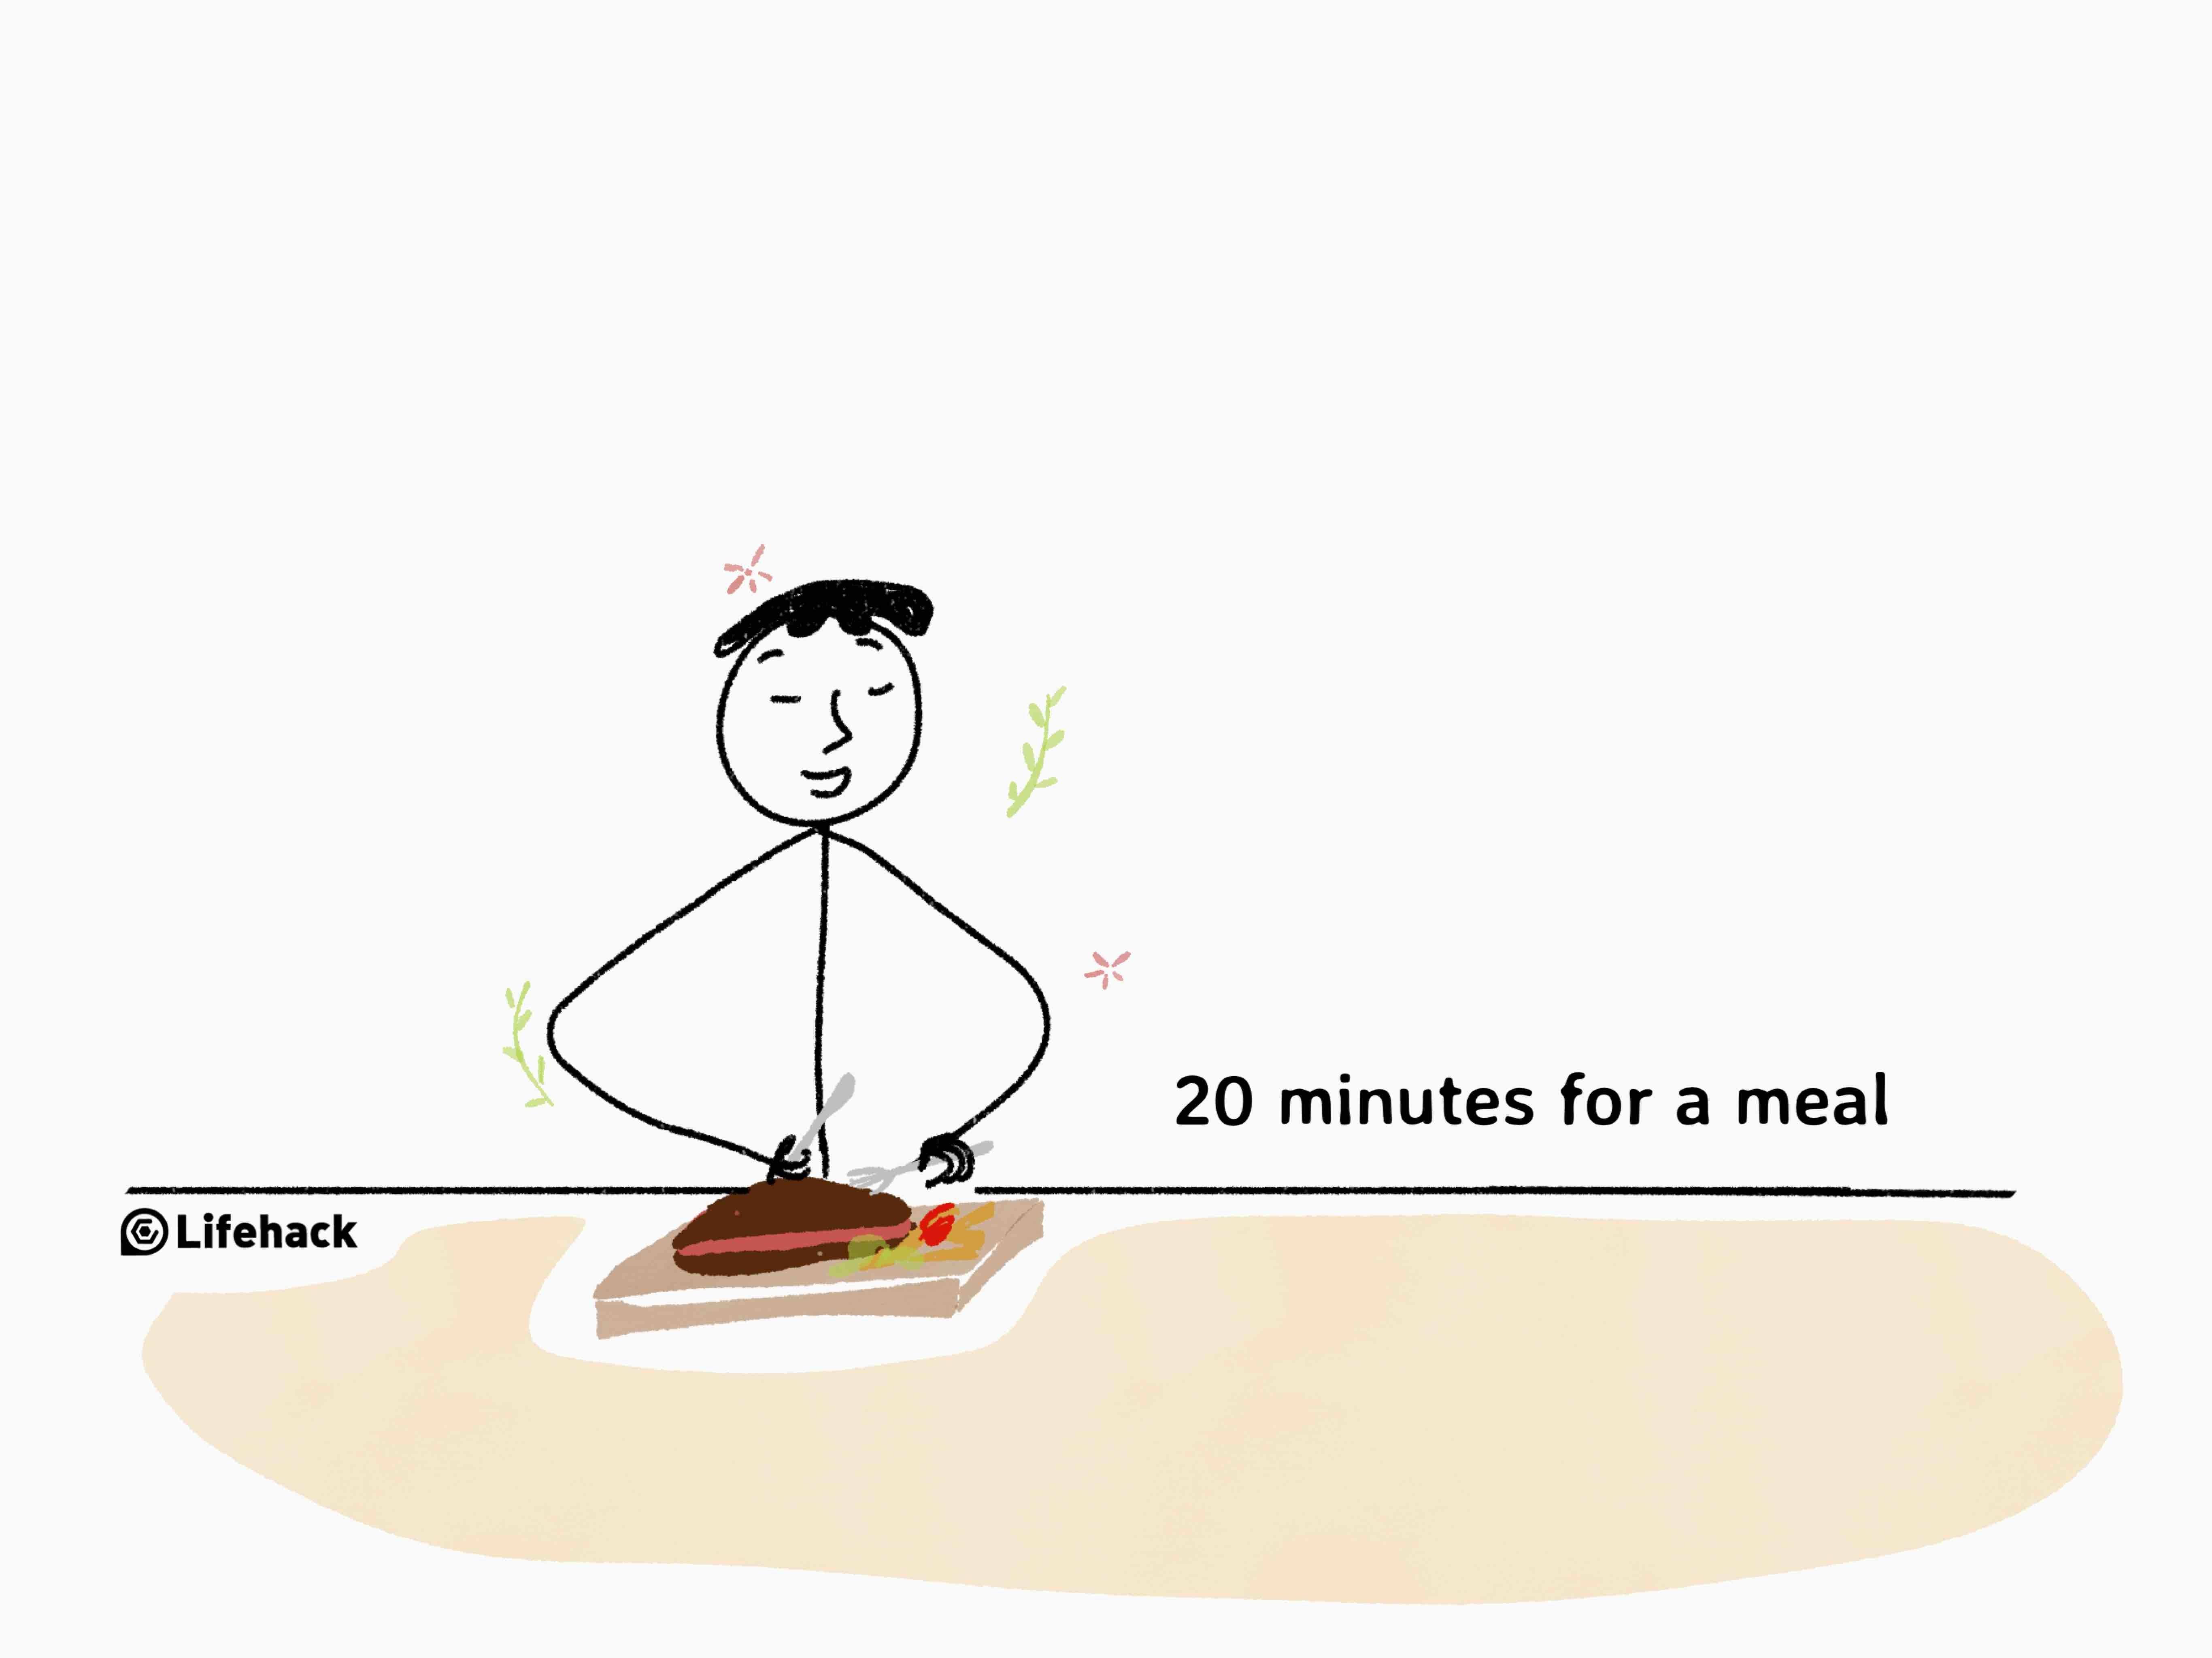 Eating Fast to Save Time Is Shortening Your Life